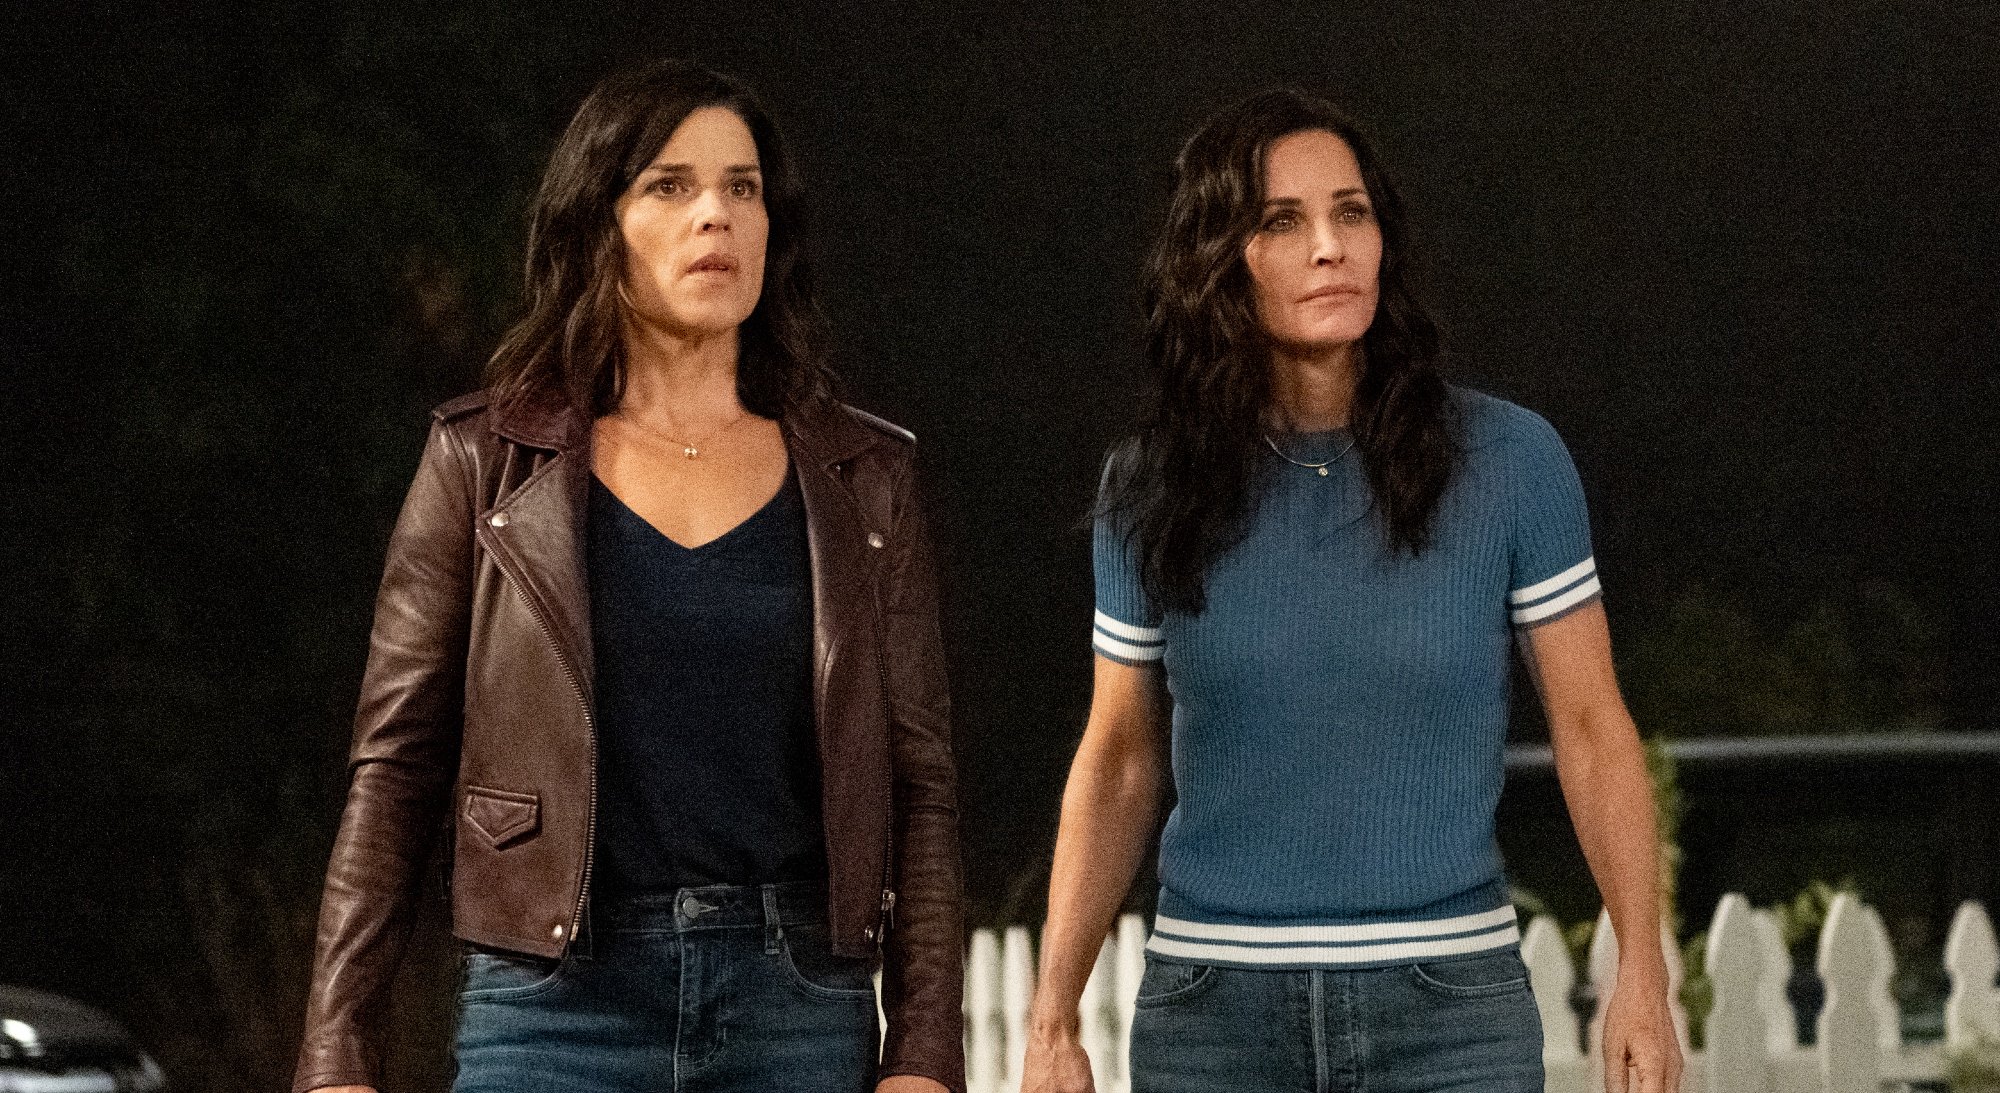 'Scream 5' cast members Neve Campbell as Sydney Prescott and Courteney Cox as Gale Weathers standing in front of a white fence looking shocked